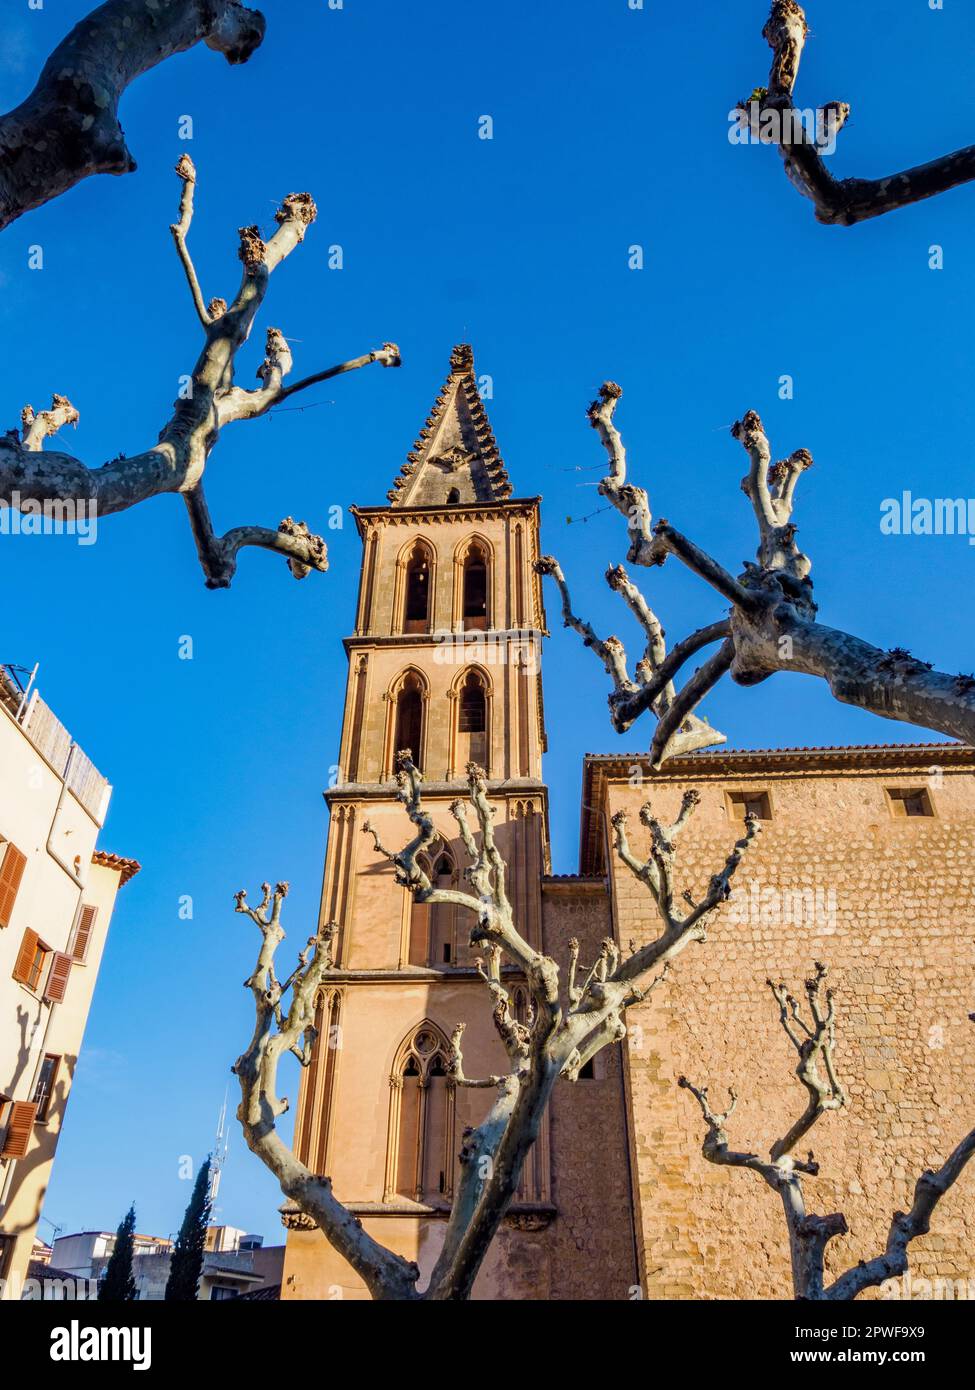 Bell tower of the Esglesia de Sant Bartomeu in the town of Soller in the Tramuntana Mountains of Majorca Spain Stock Photo